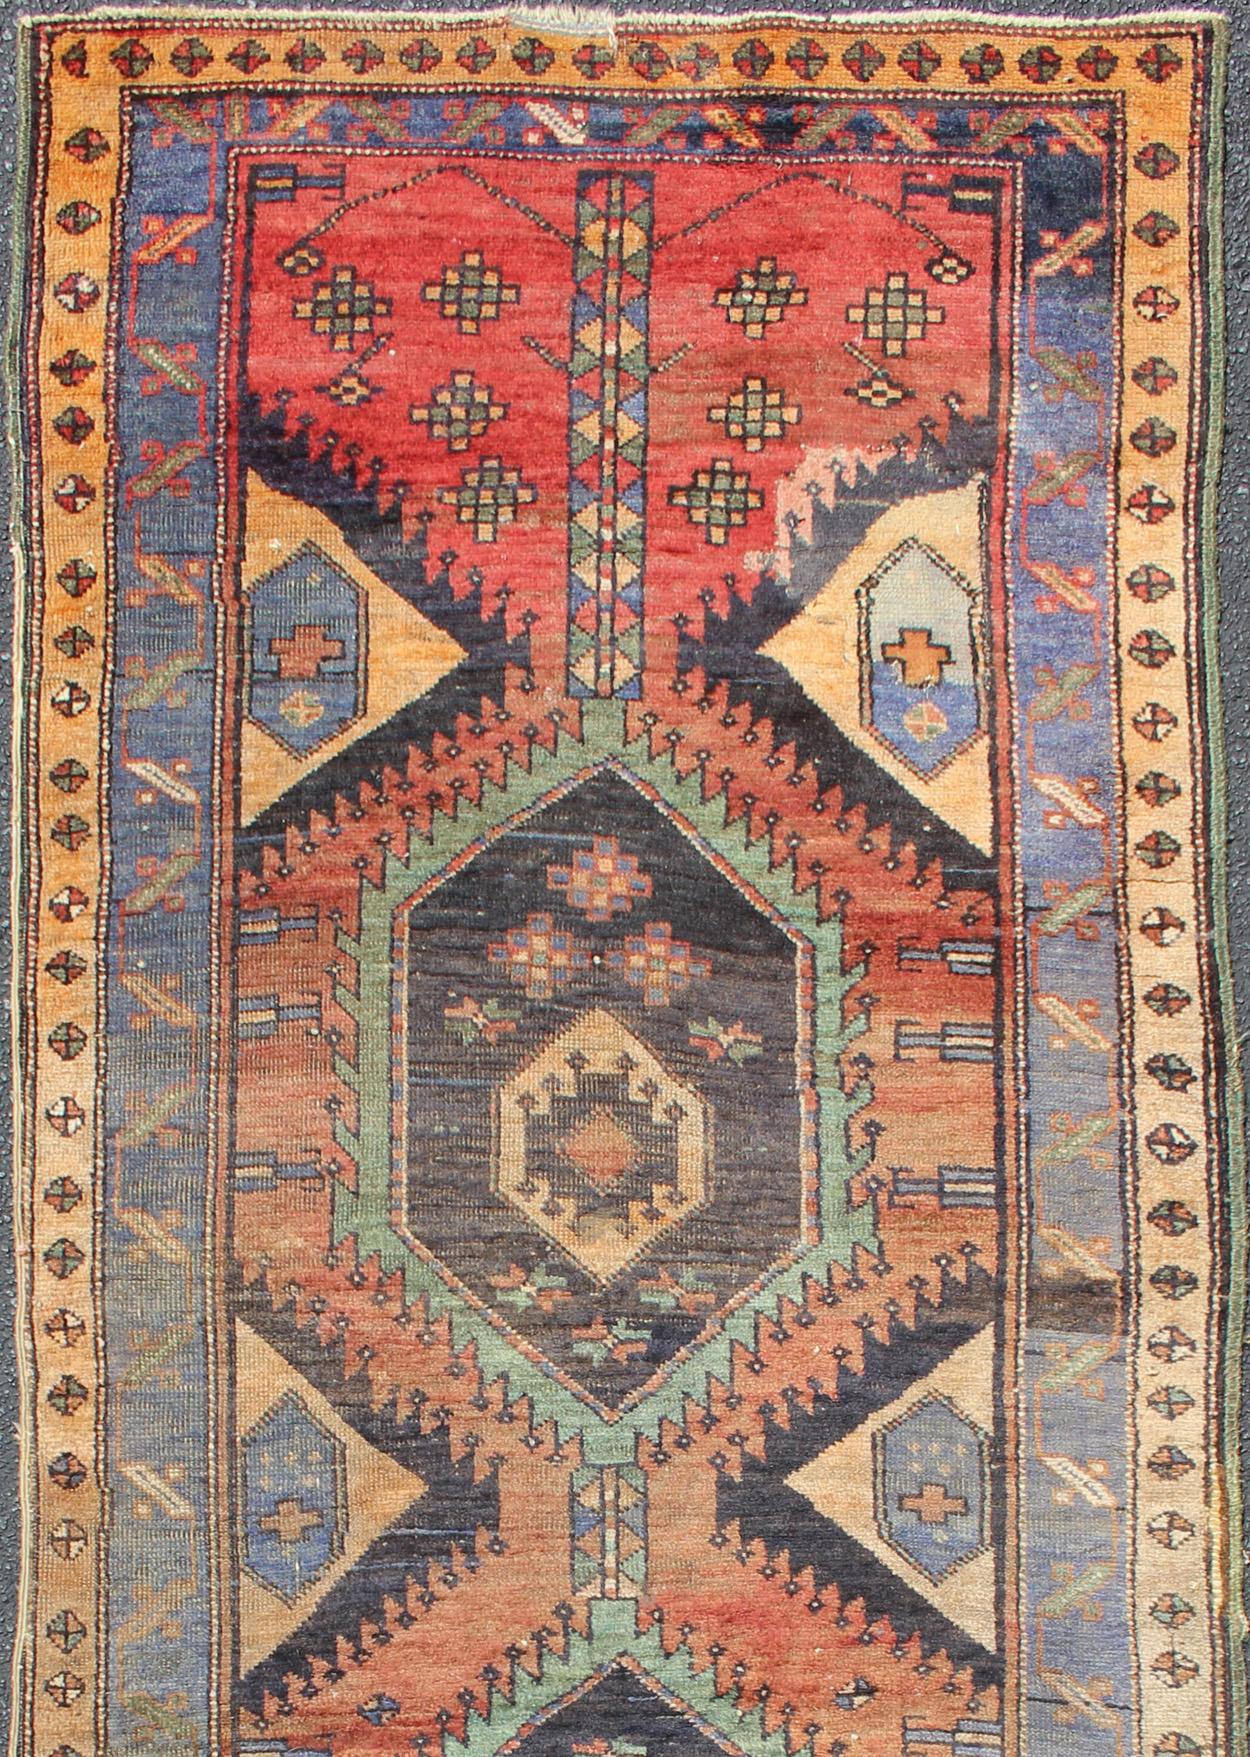 Colorful vintage Persian Hamadan runner with tribal Motifs, Vertical Medallion Design, rug DSP-0505-20, country of origin / type: Iran / Hamadan, circa 1930.

This vintage Persian Hamadan runner (circa mid-20th century) features a unique blend of